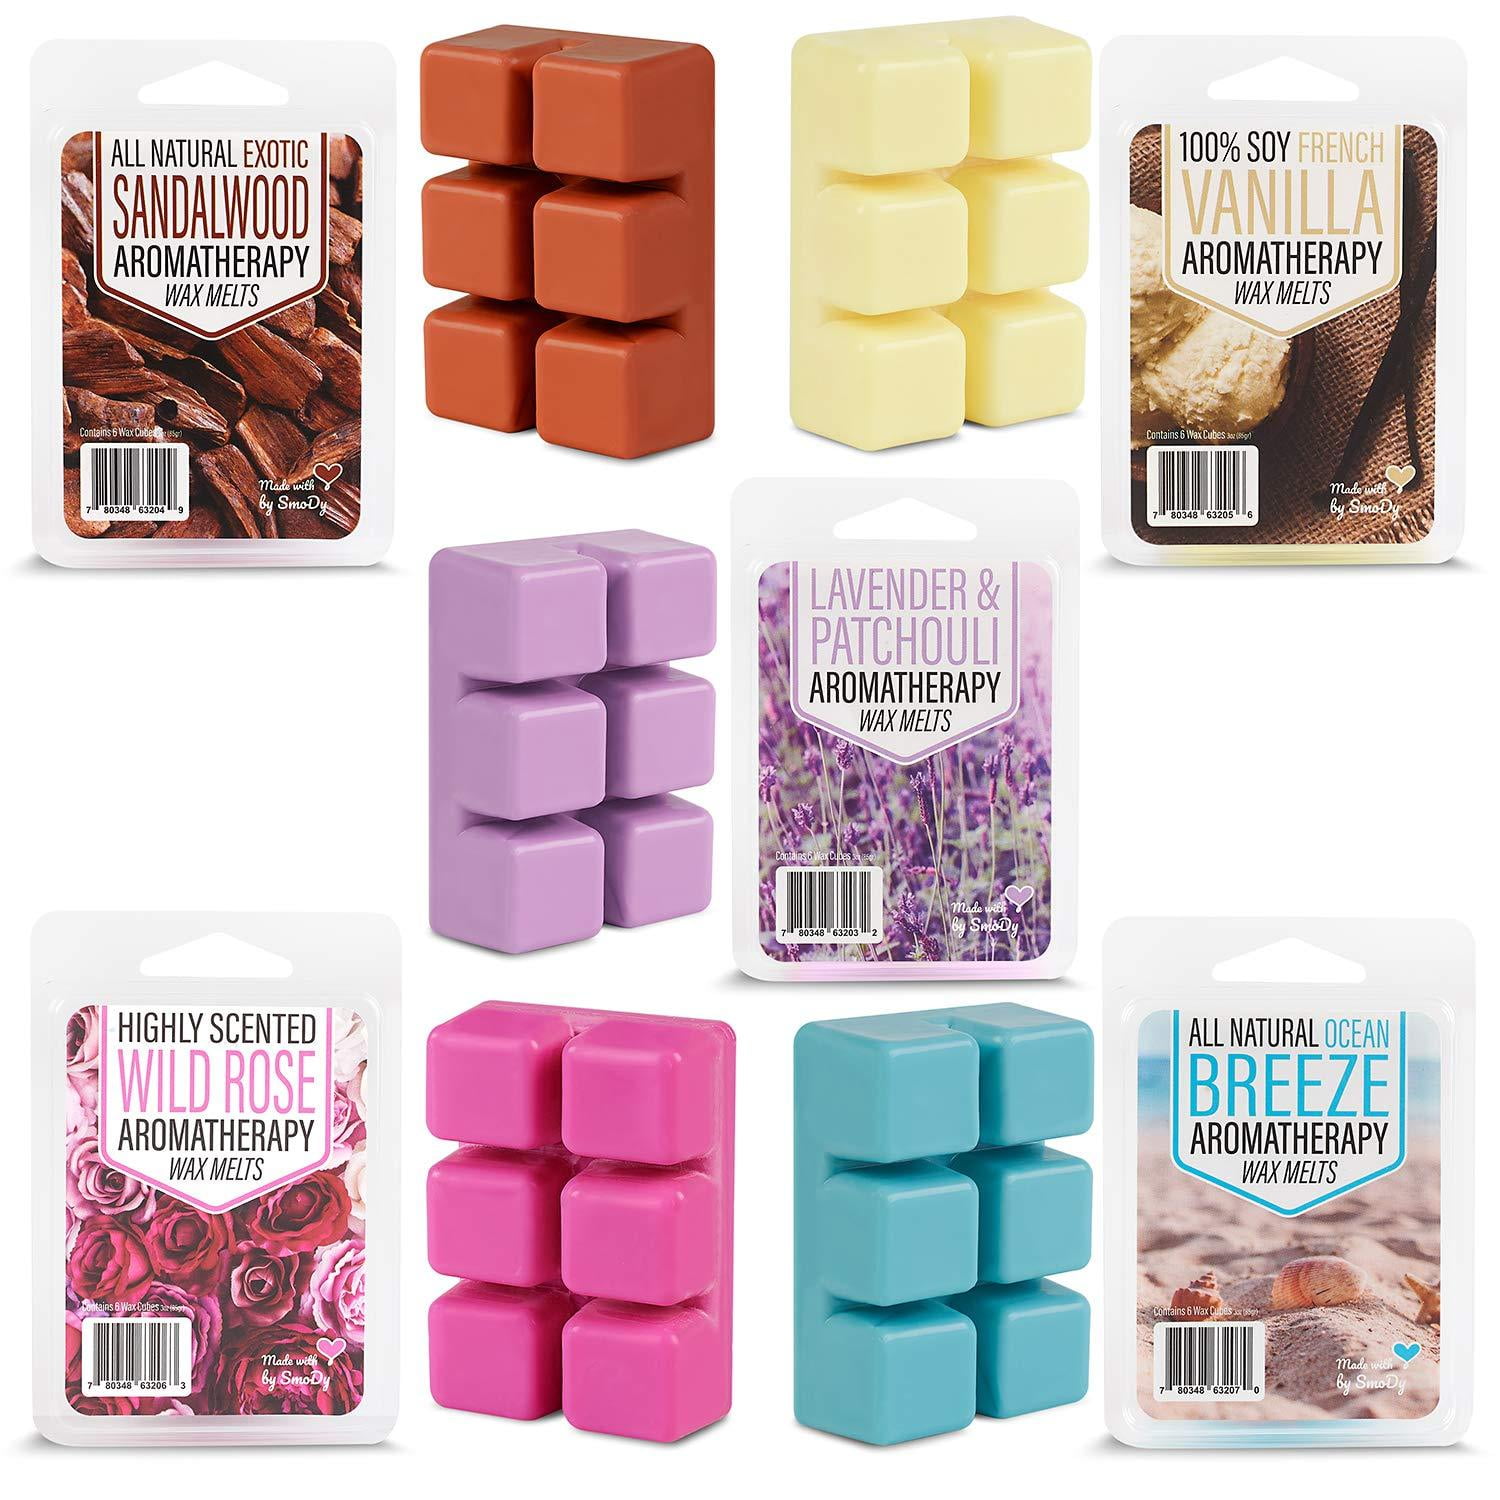 Highly scented wax melts 